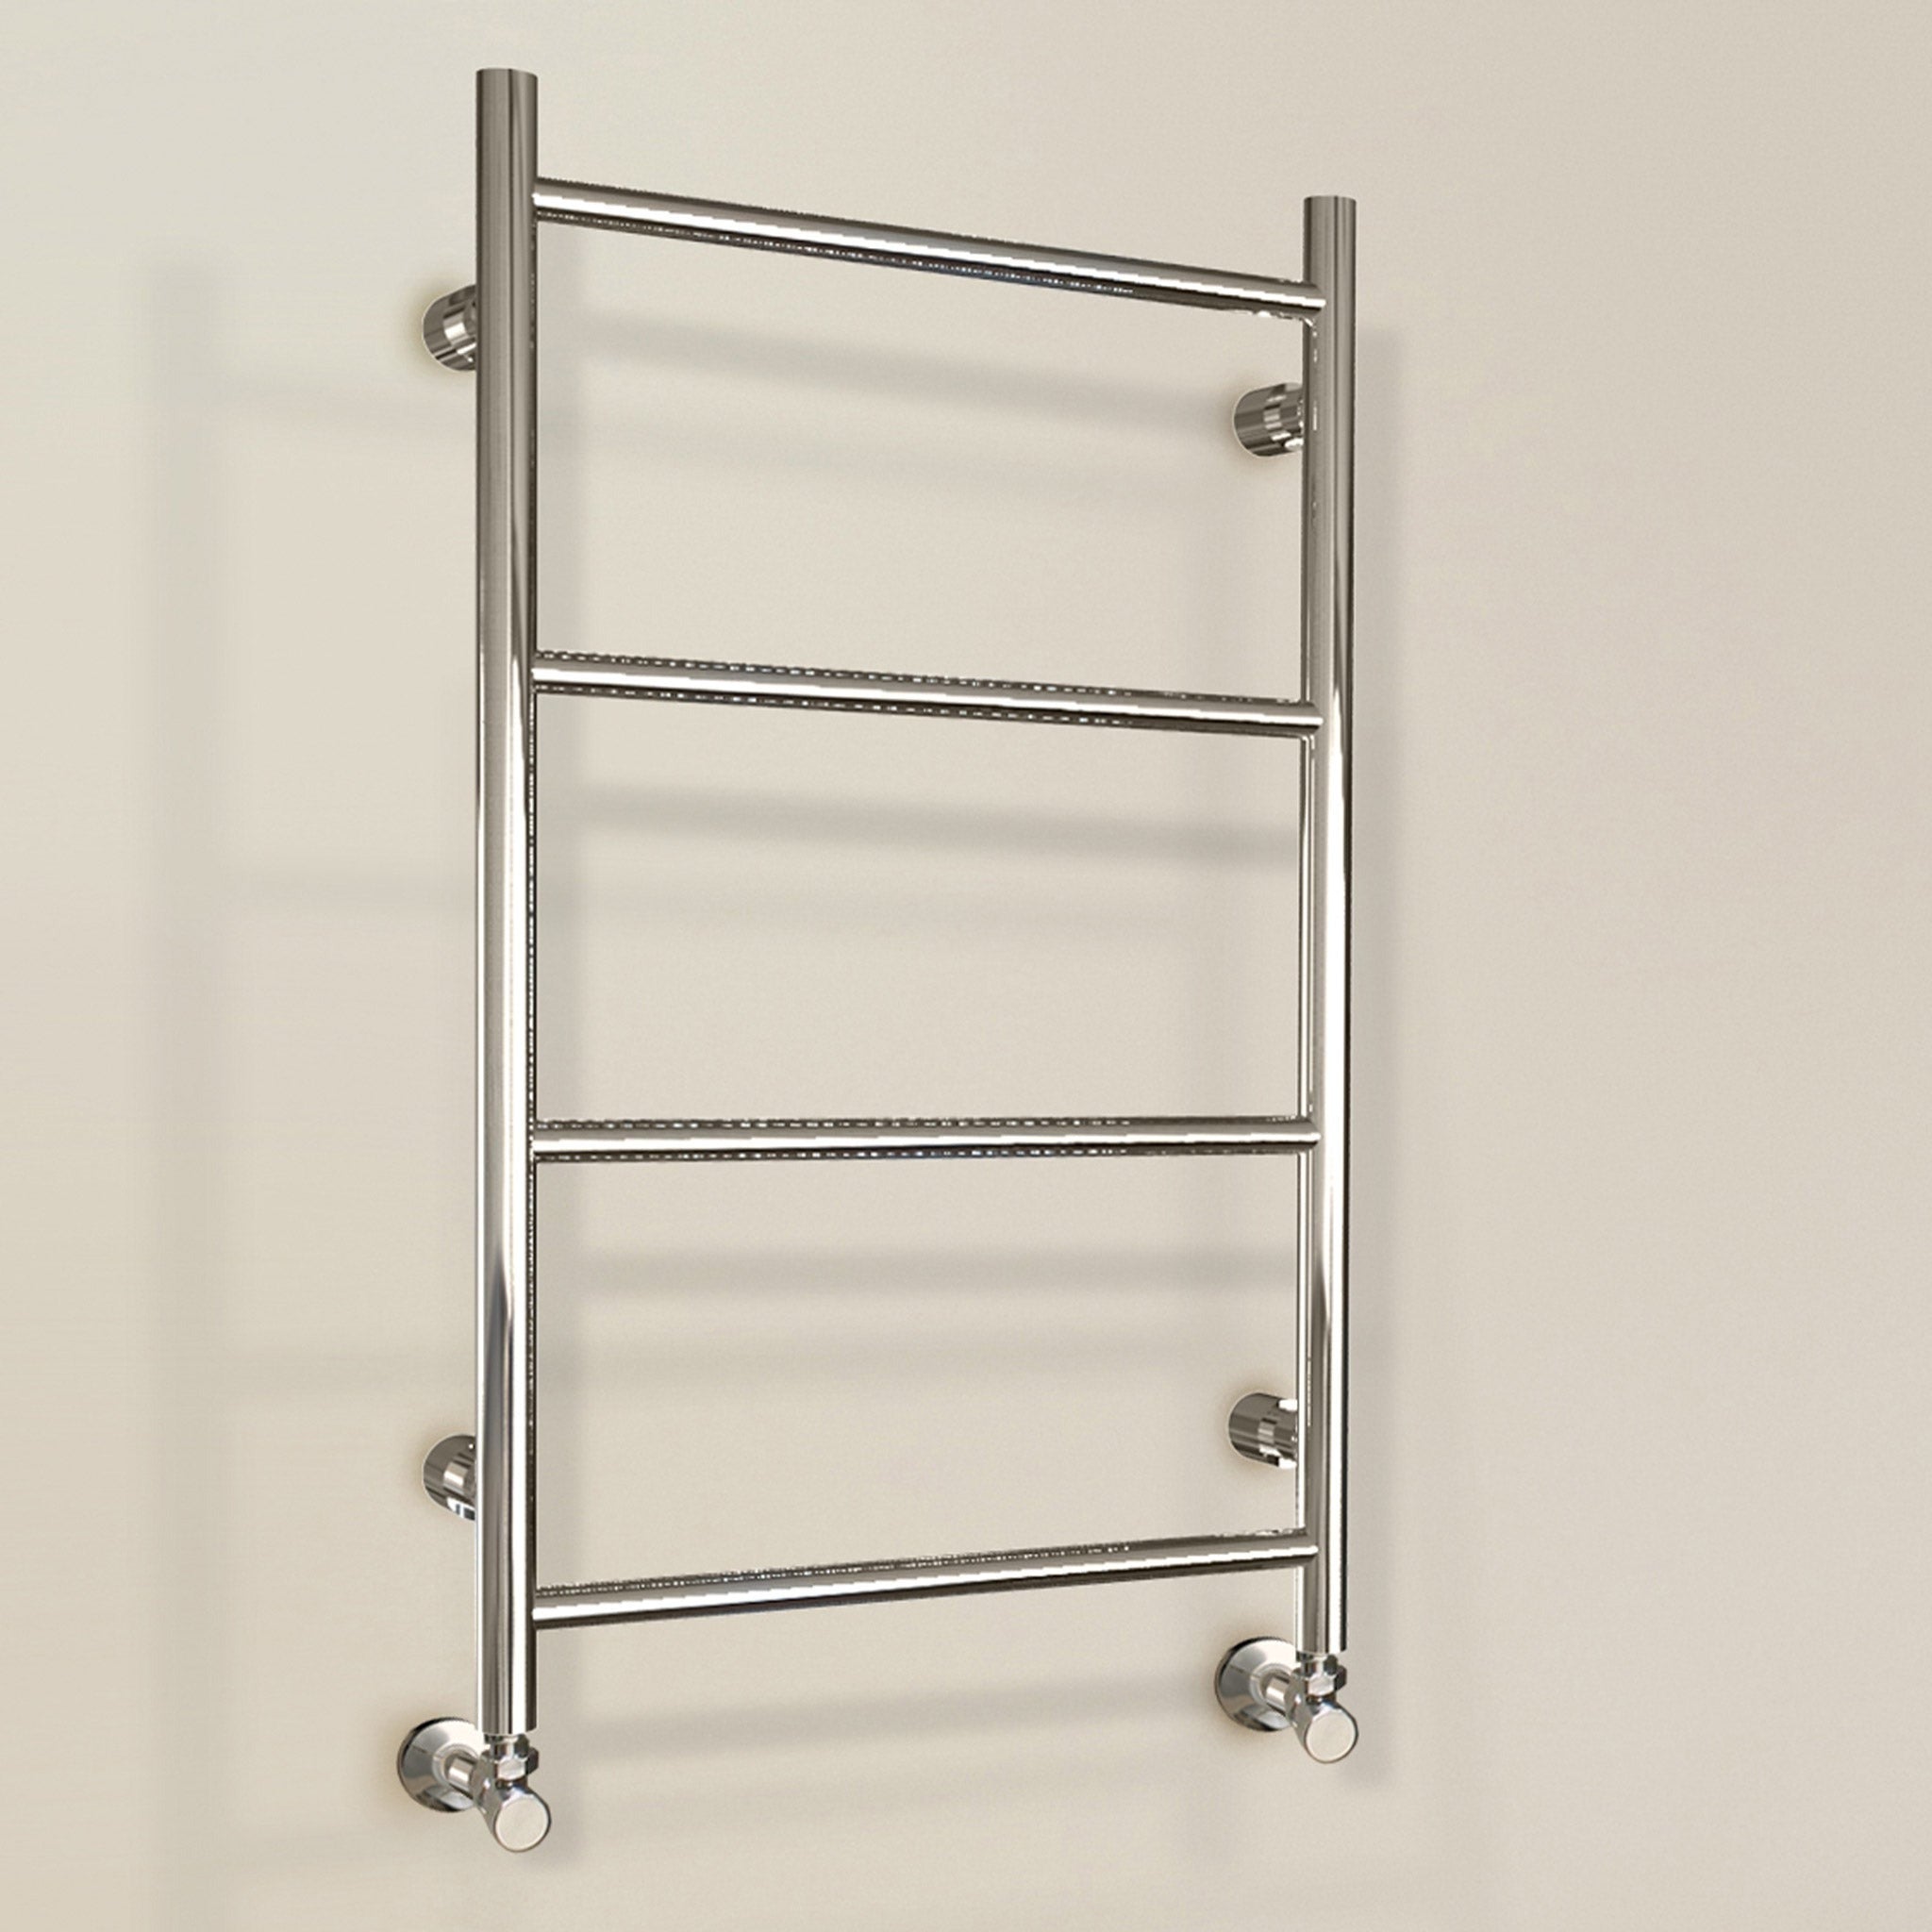 Vogue Pure Wall Mounted Heated Towel Rail 700 x 425mm